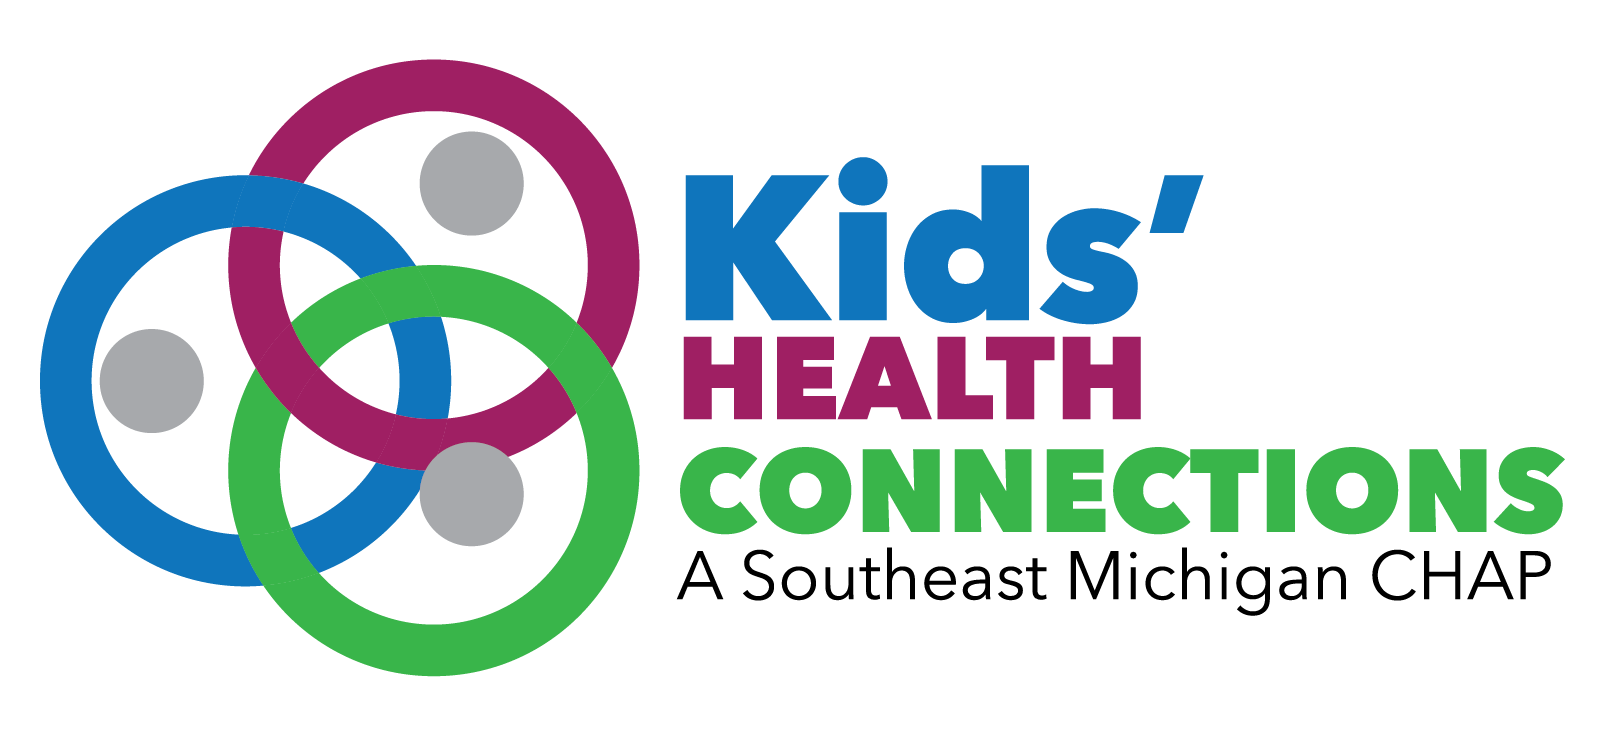 Kids Health Connections